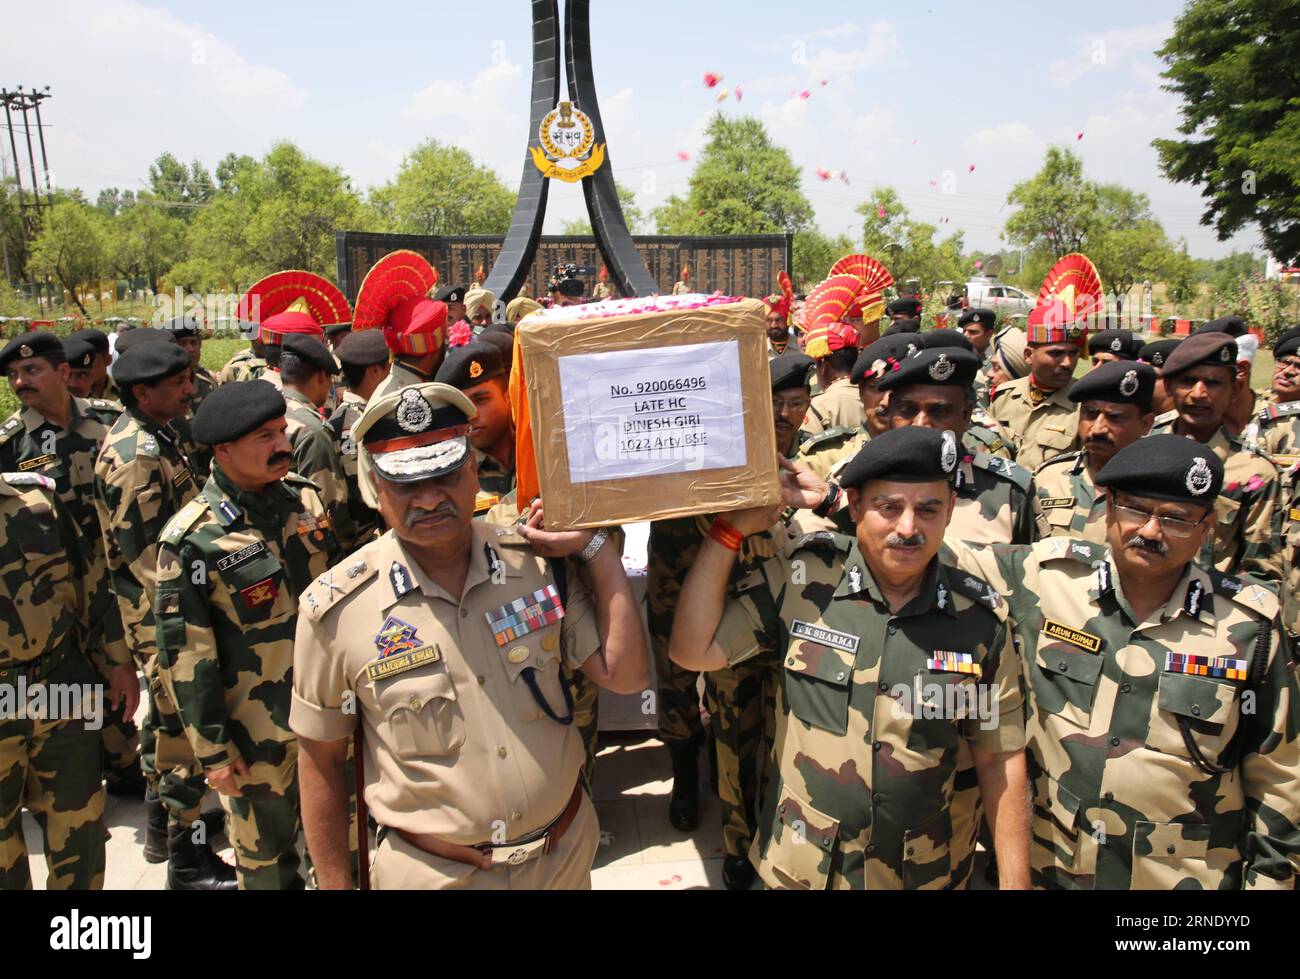 (160604) -- SRINAGAR, June 4, 2016 -- Officials of India s Border Security Force (BSF) carry the coffin of a slain border guard during a wreath laying ceremony at a BSF camp in the outskirts of Srinagar, summer capital of Indian-controlled Kashmir, June 4, 2016. The militant attack on convoy of India s Border Security Force (BSF) on Friday left three border guards dead and nine others wounded, two of them critically, in restive Indian-controlled Kashmir, officials said. ) (cyc) INDIA-KASHMIR-SRINAGAR-MILITANT ATTACK JavedxDar PUBLICATIONxNOTxINxCHN   160604 Srinagar June 4 2016 Officials of In Stock Photo